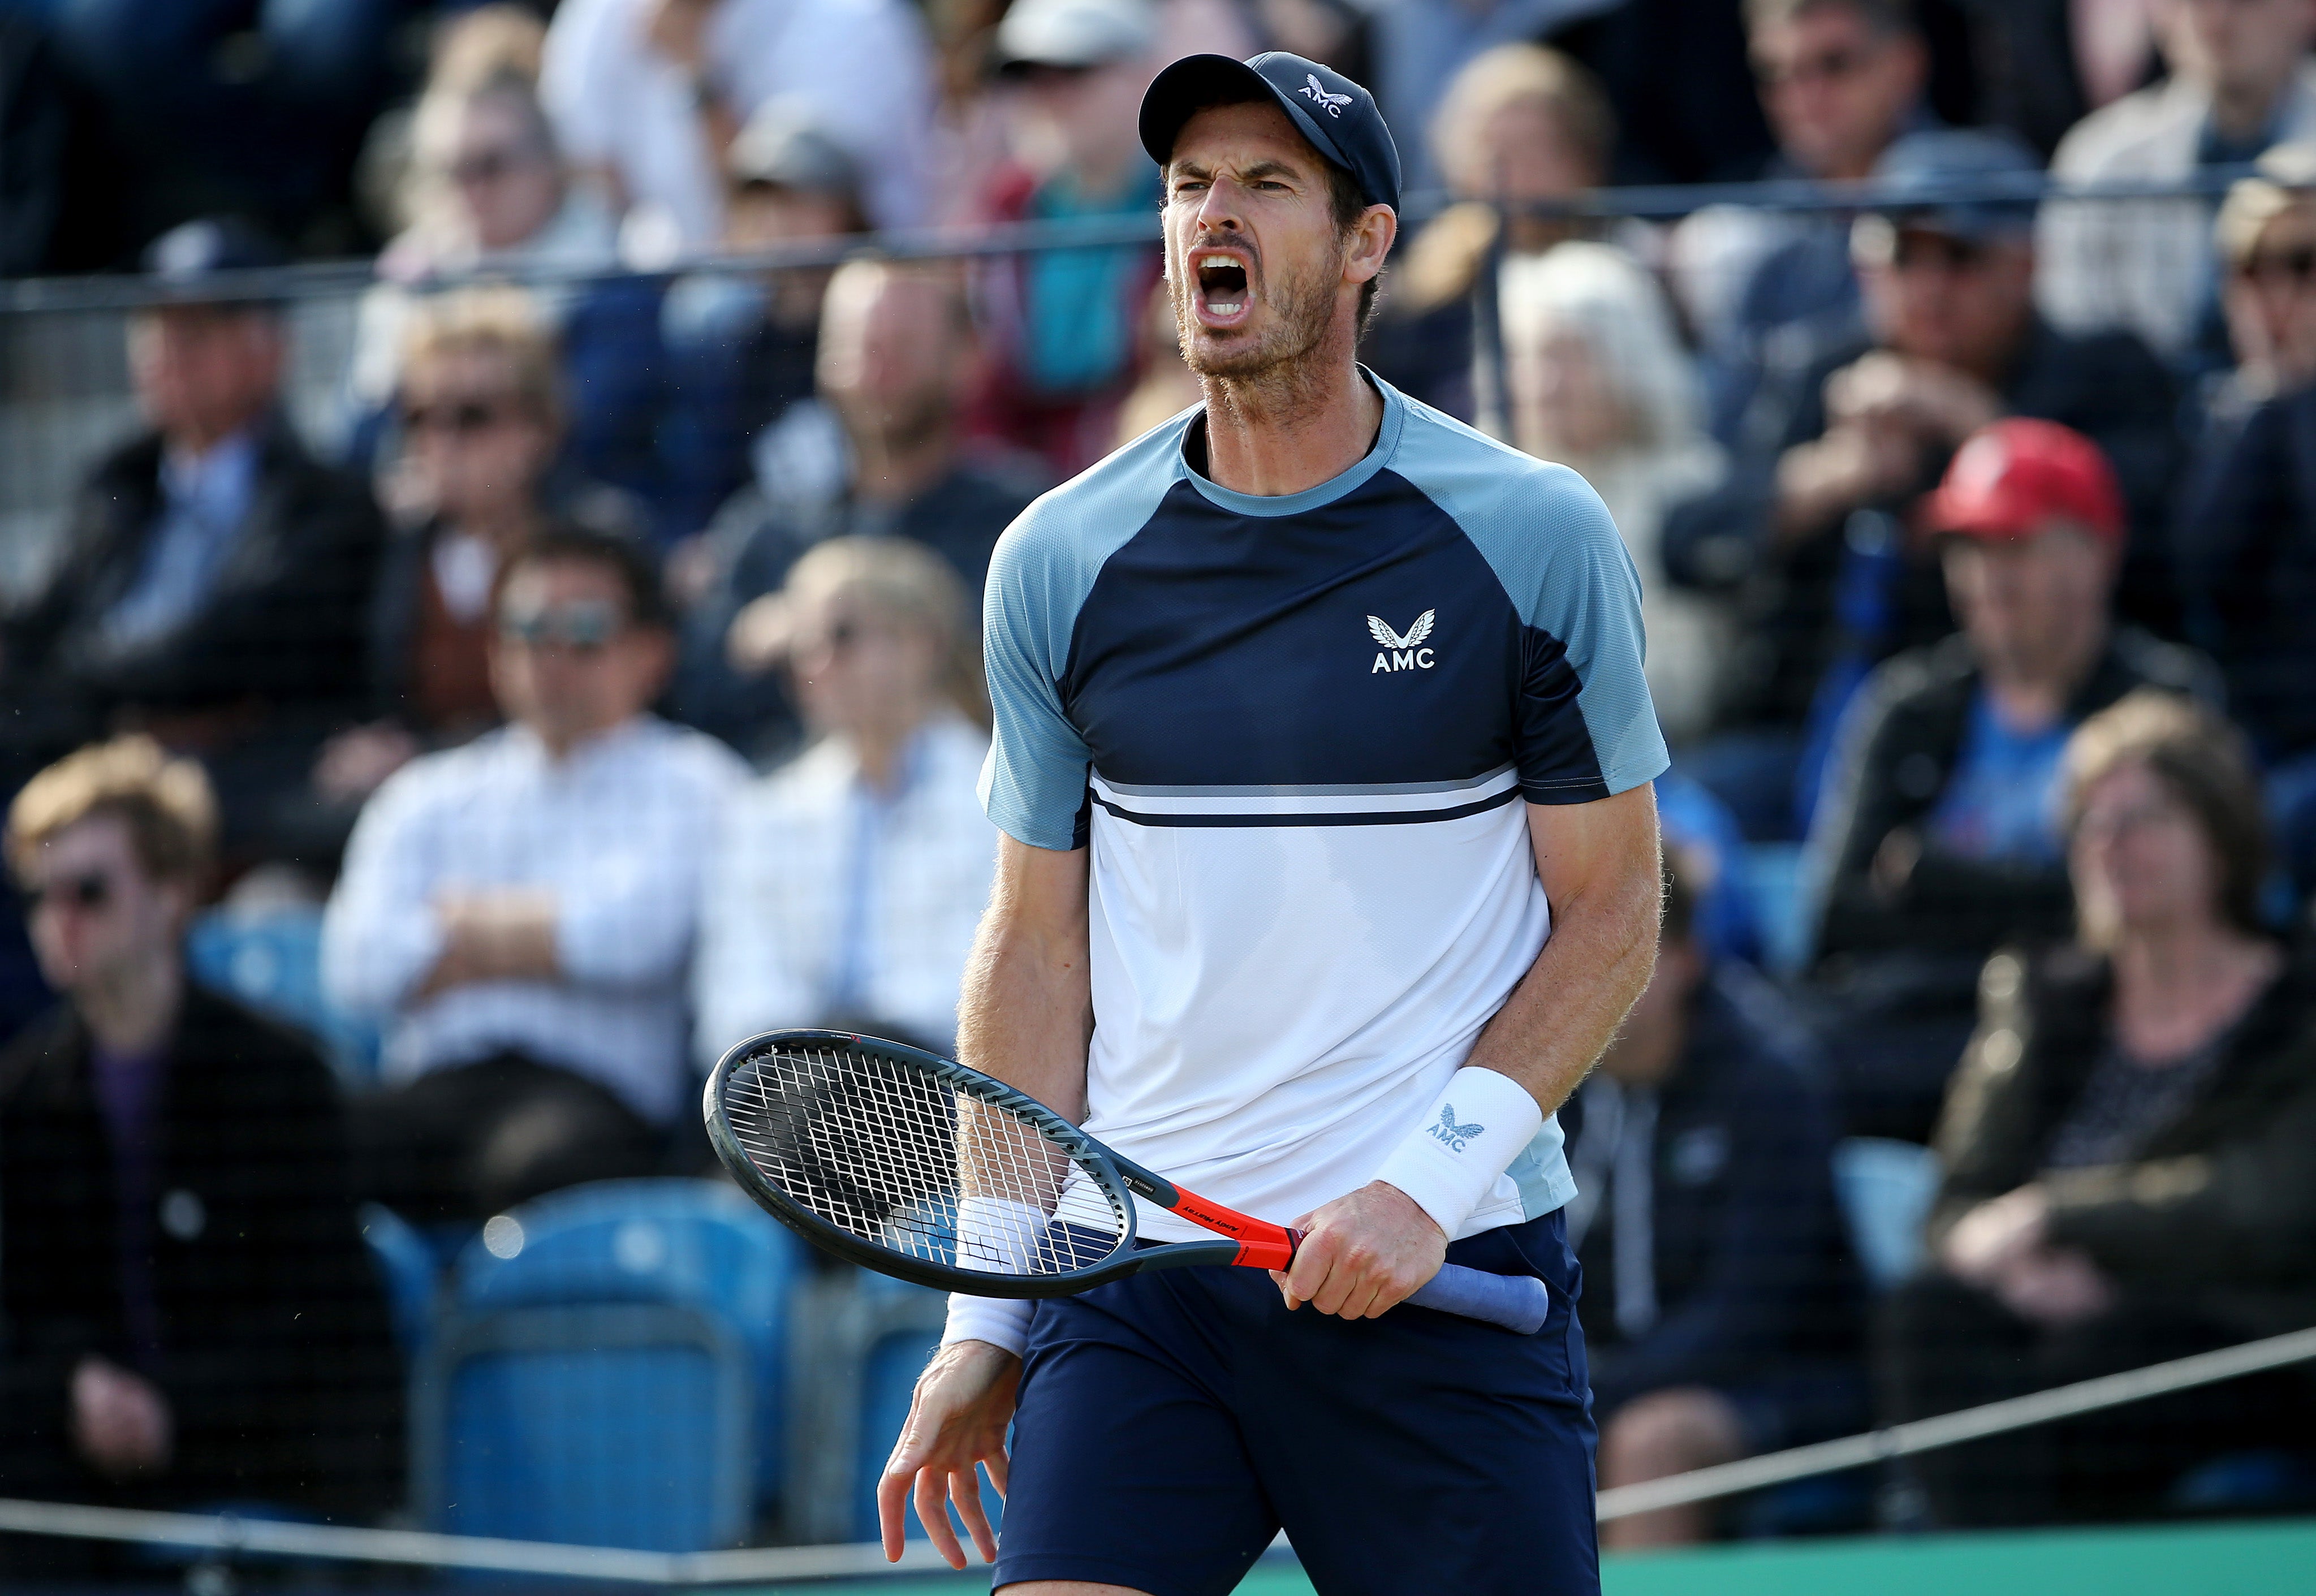 Murray recovered from a slow start to win in straight sets